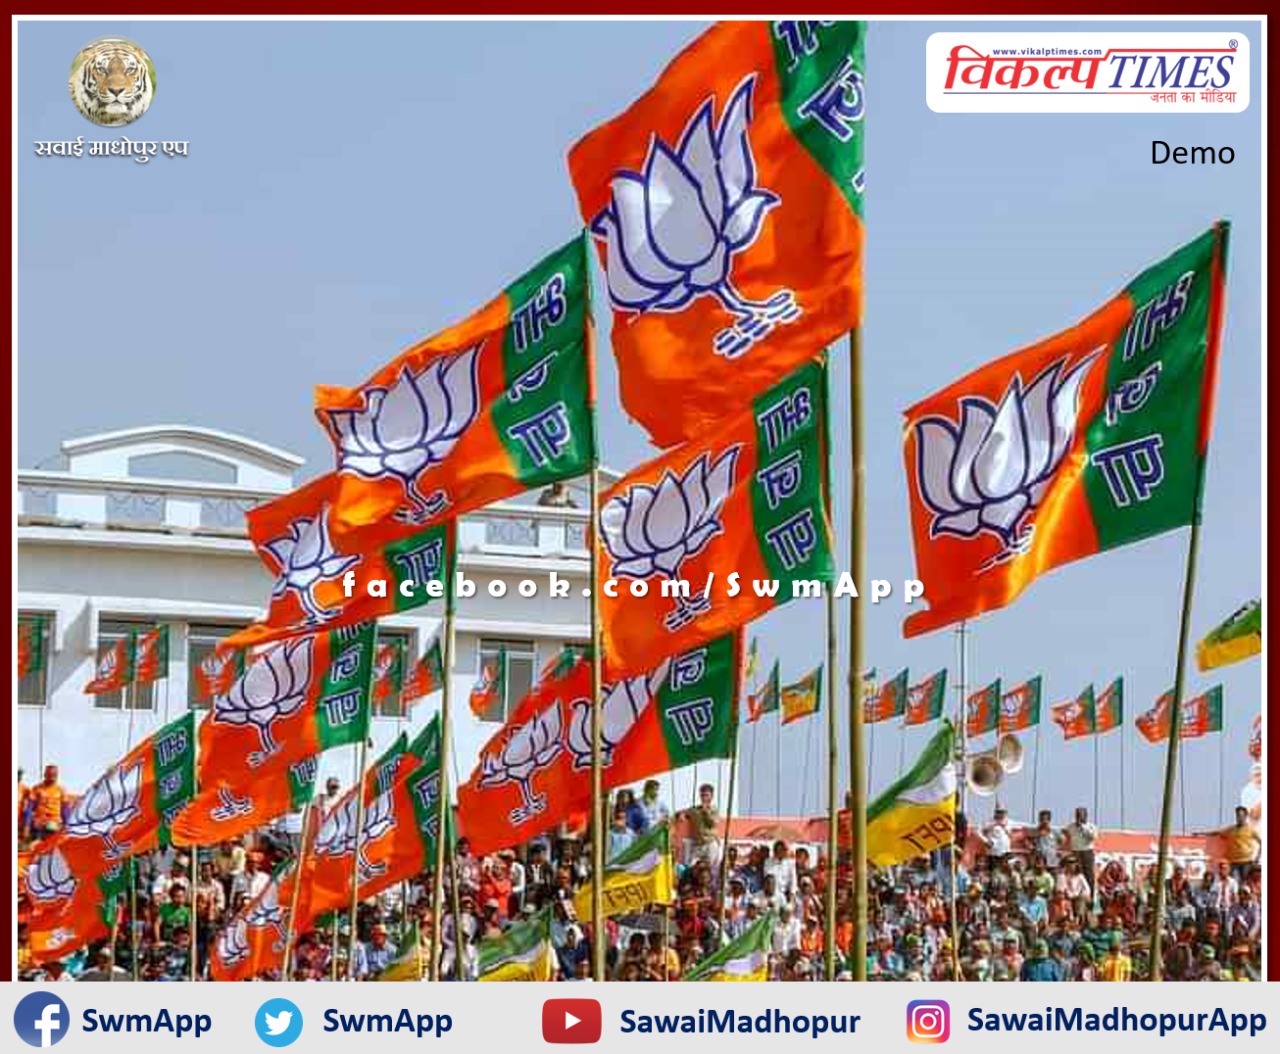 BJP's district level residential training will start from May 4 in sawai madhopur